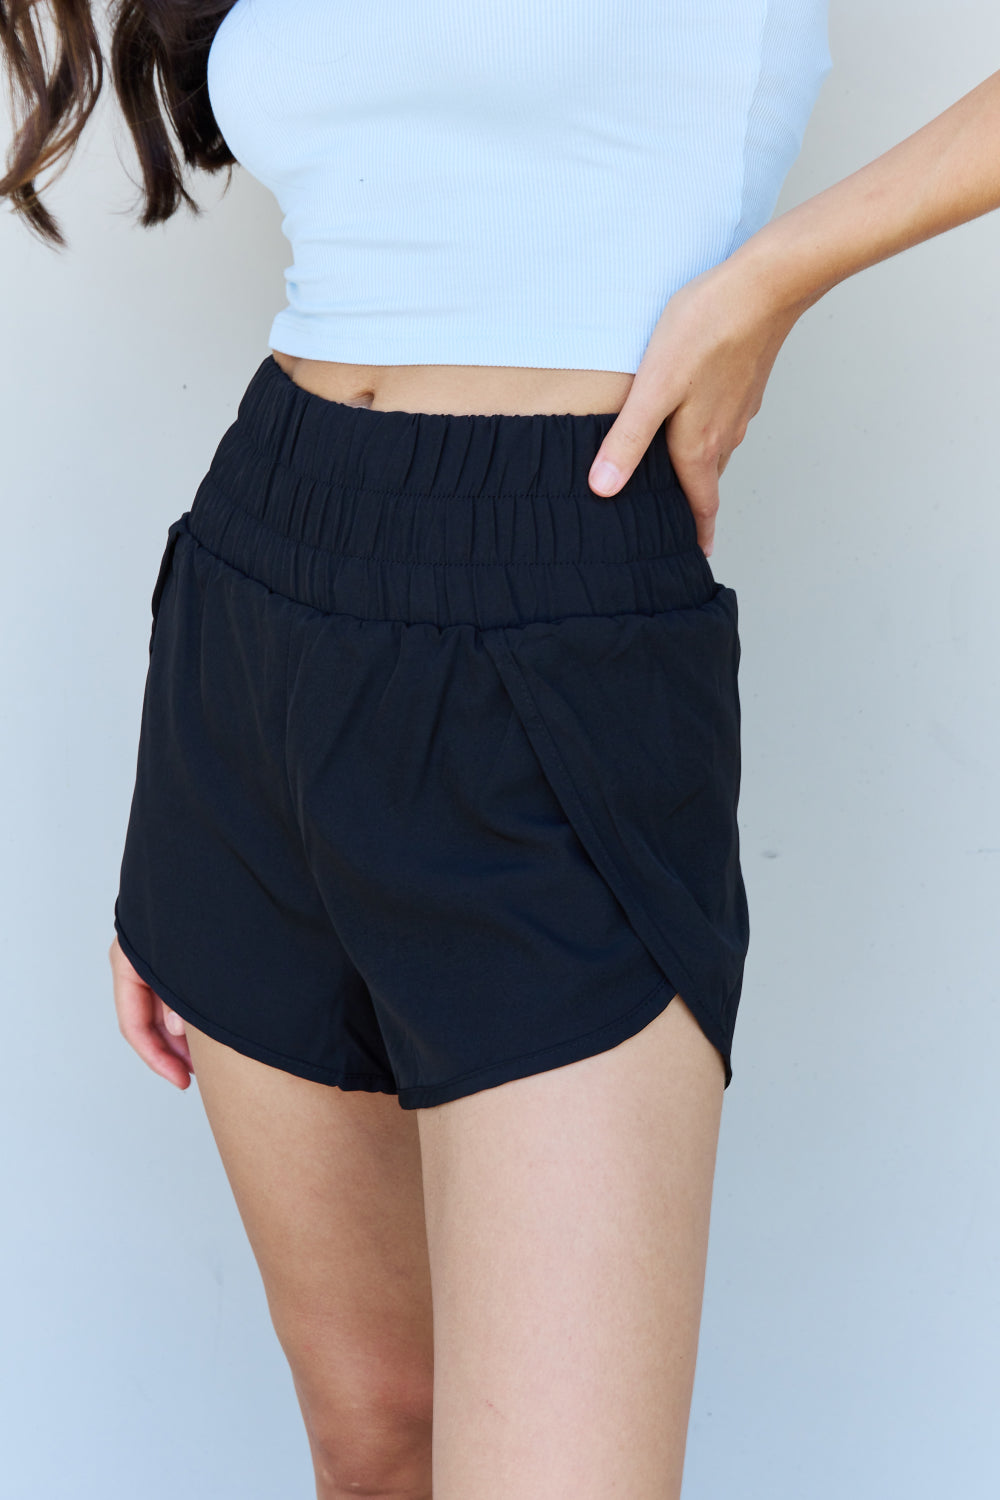 Dark Slate Gray Ninexis Stay Active High Waistband Active Shorts in Black Sentient Beauty Fashions Apparel & Accessories